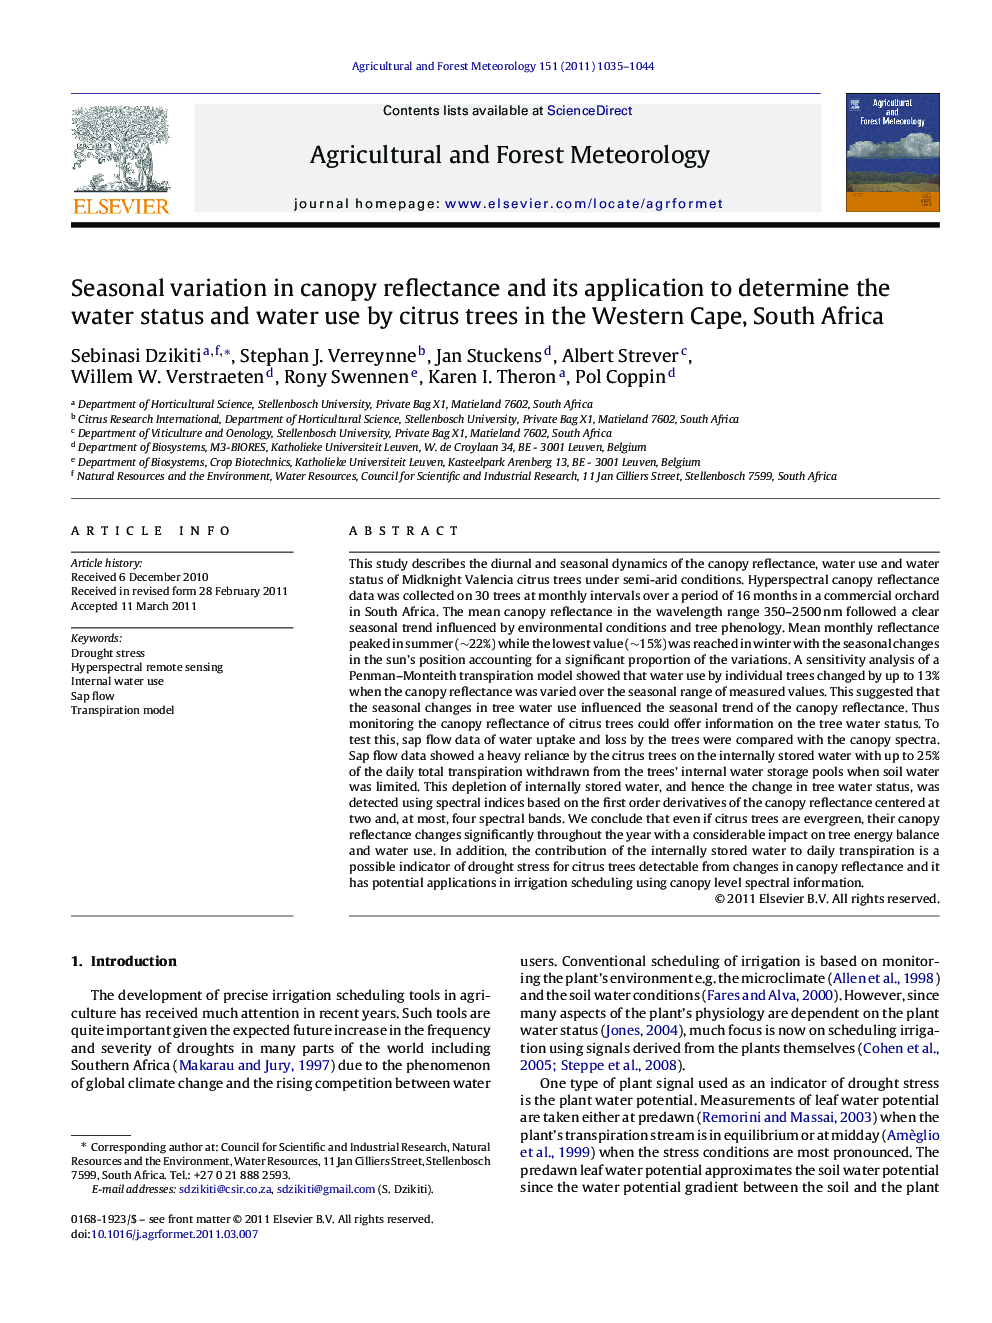 Seasonal variation in canopy reflectance and its application to determine the water status and water use by citrus trees in the Western Cape, South Africa